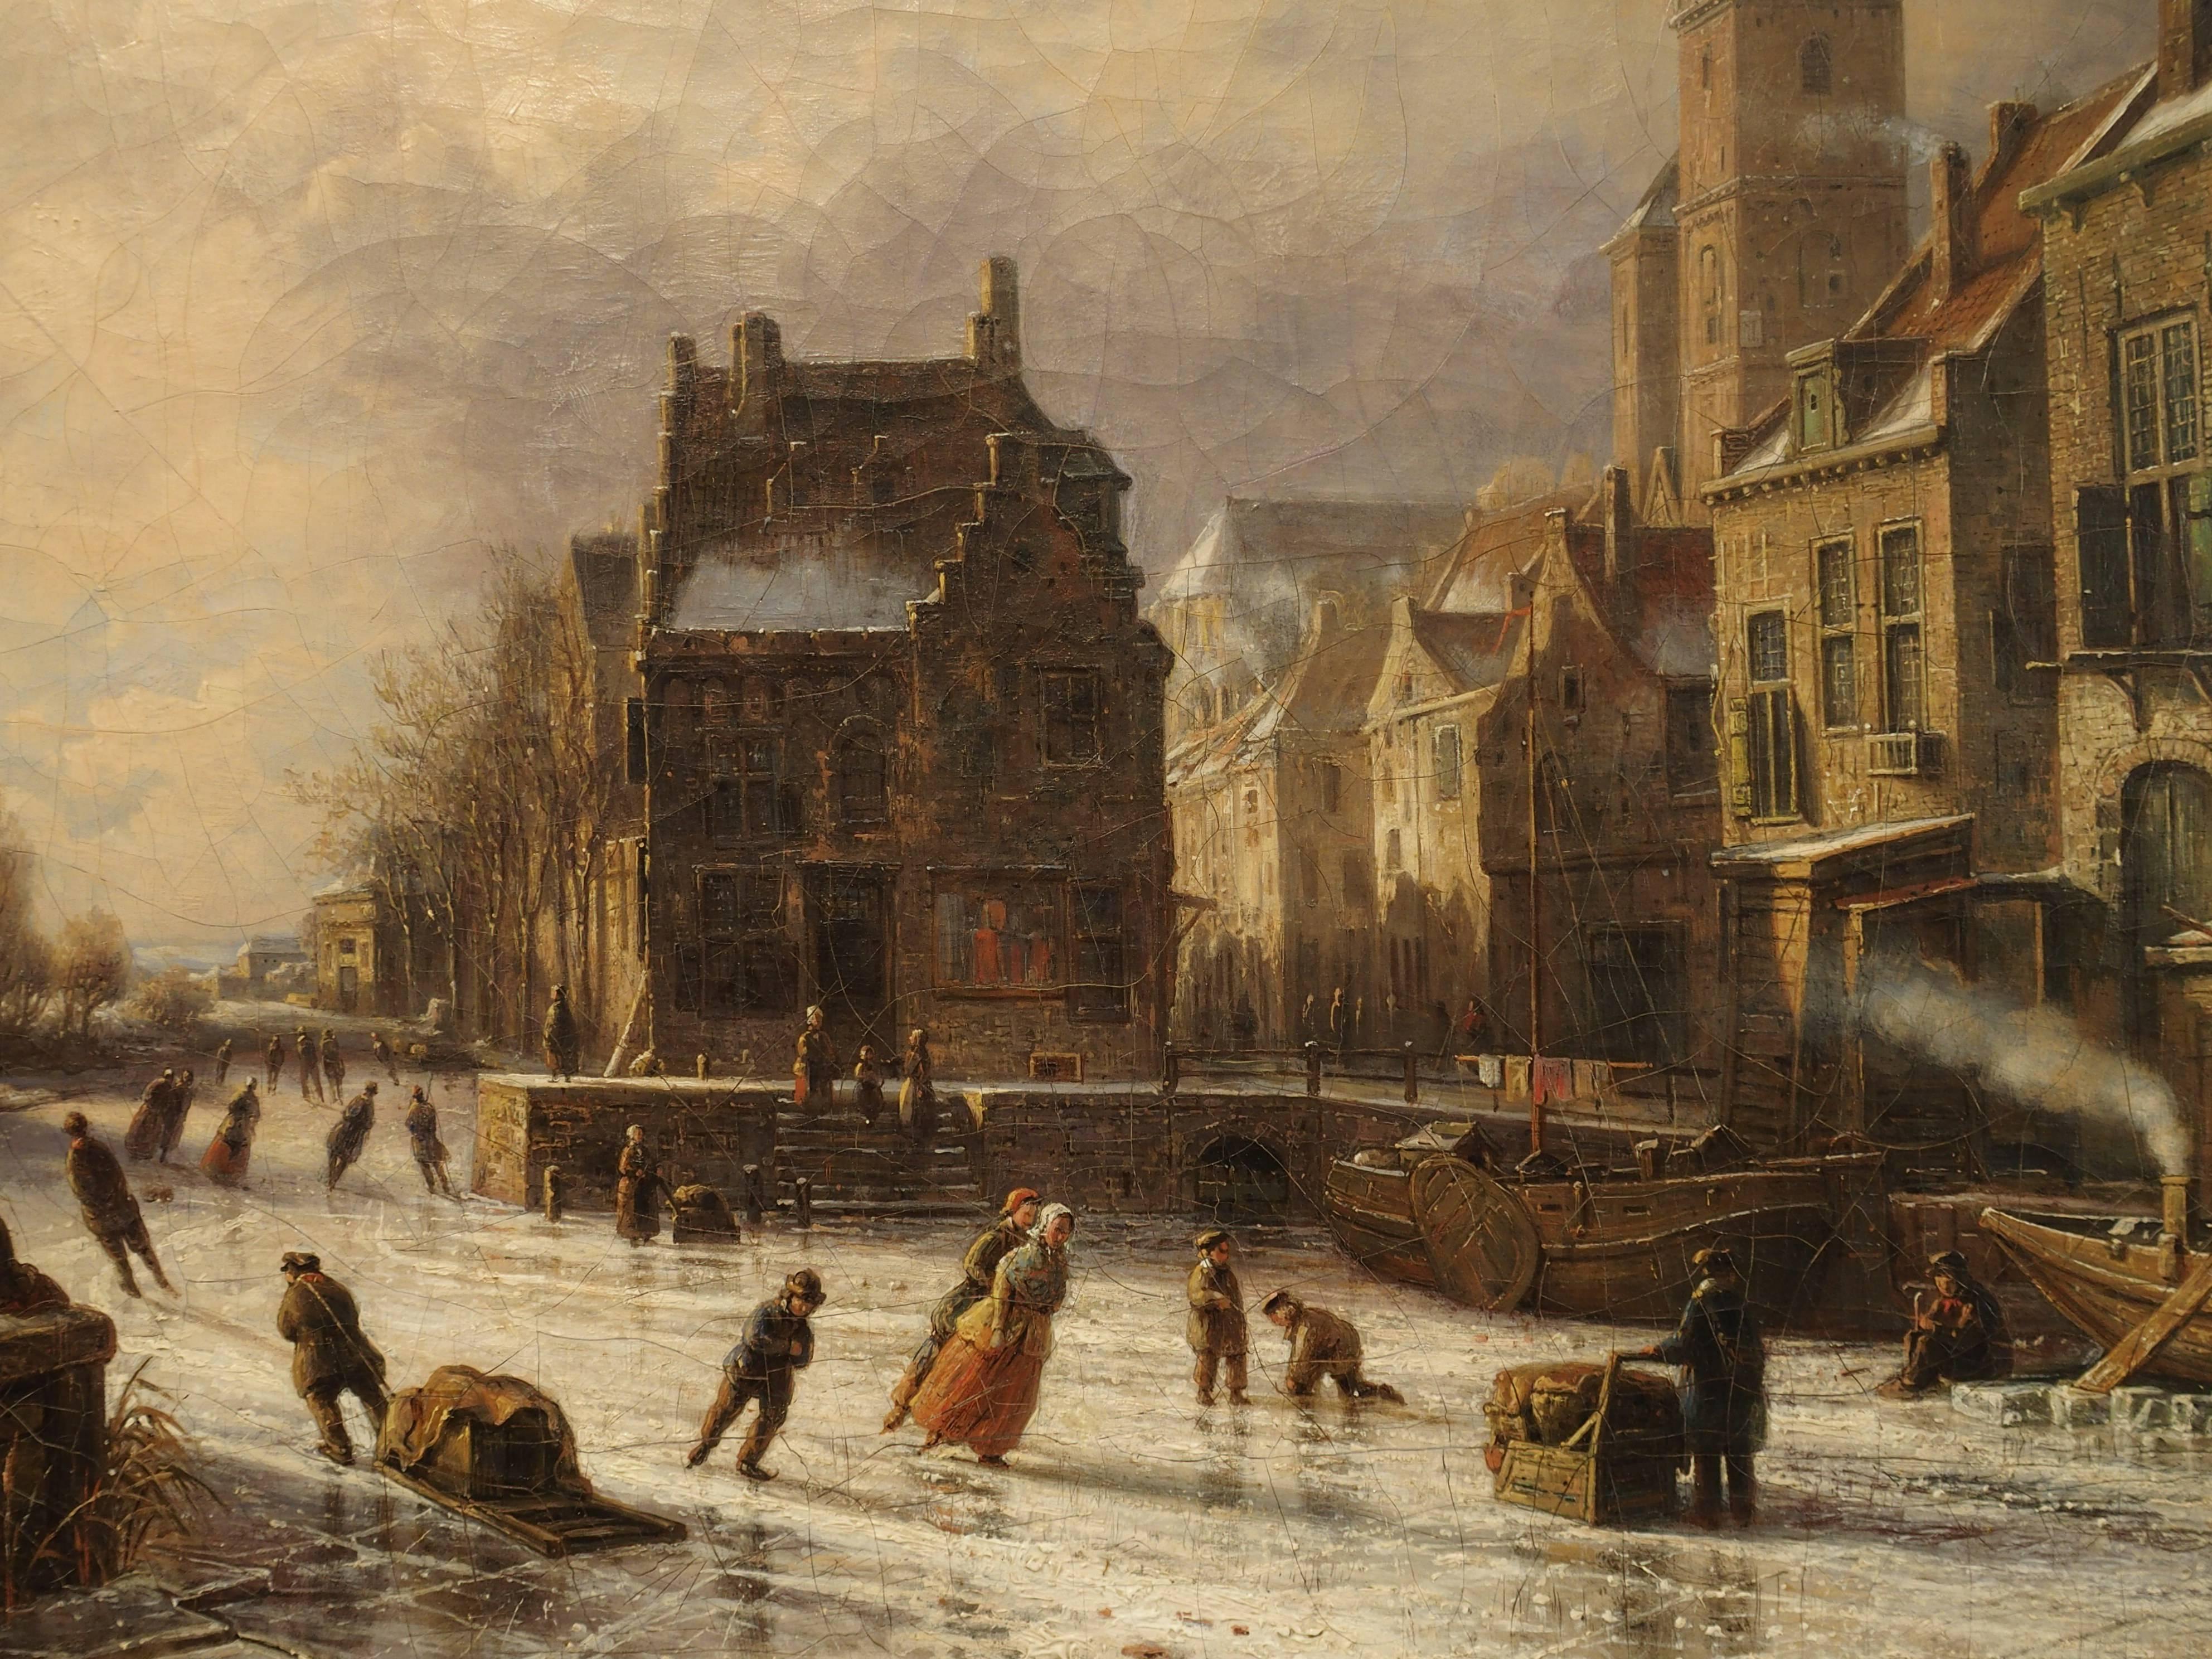 This appealing oil on canvas painting was done by the Dutch artist, Theodoor Soeterik. Theodoor was born and lived his entire life in the great city of Utrecht in the Netherlands. He was an apprentice to Bruno van Straaten, who was largely